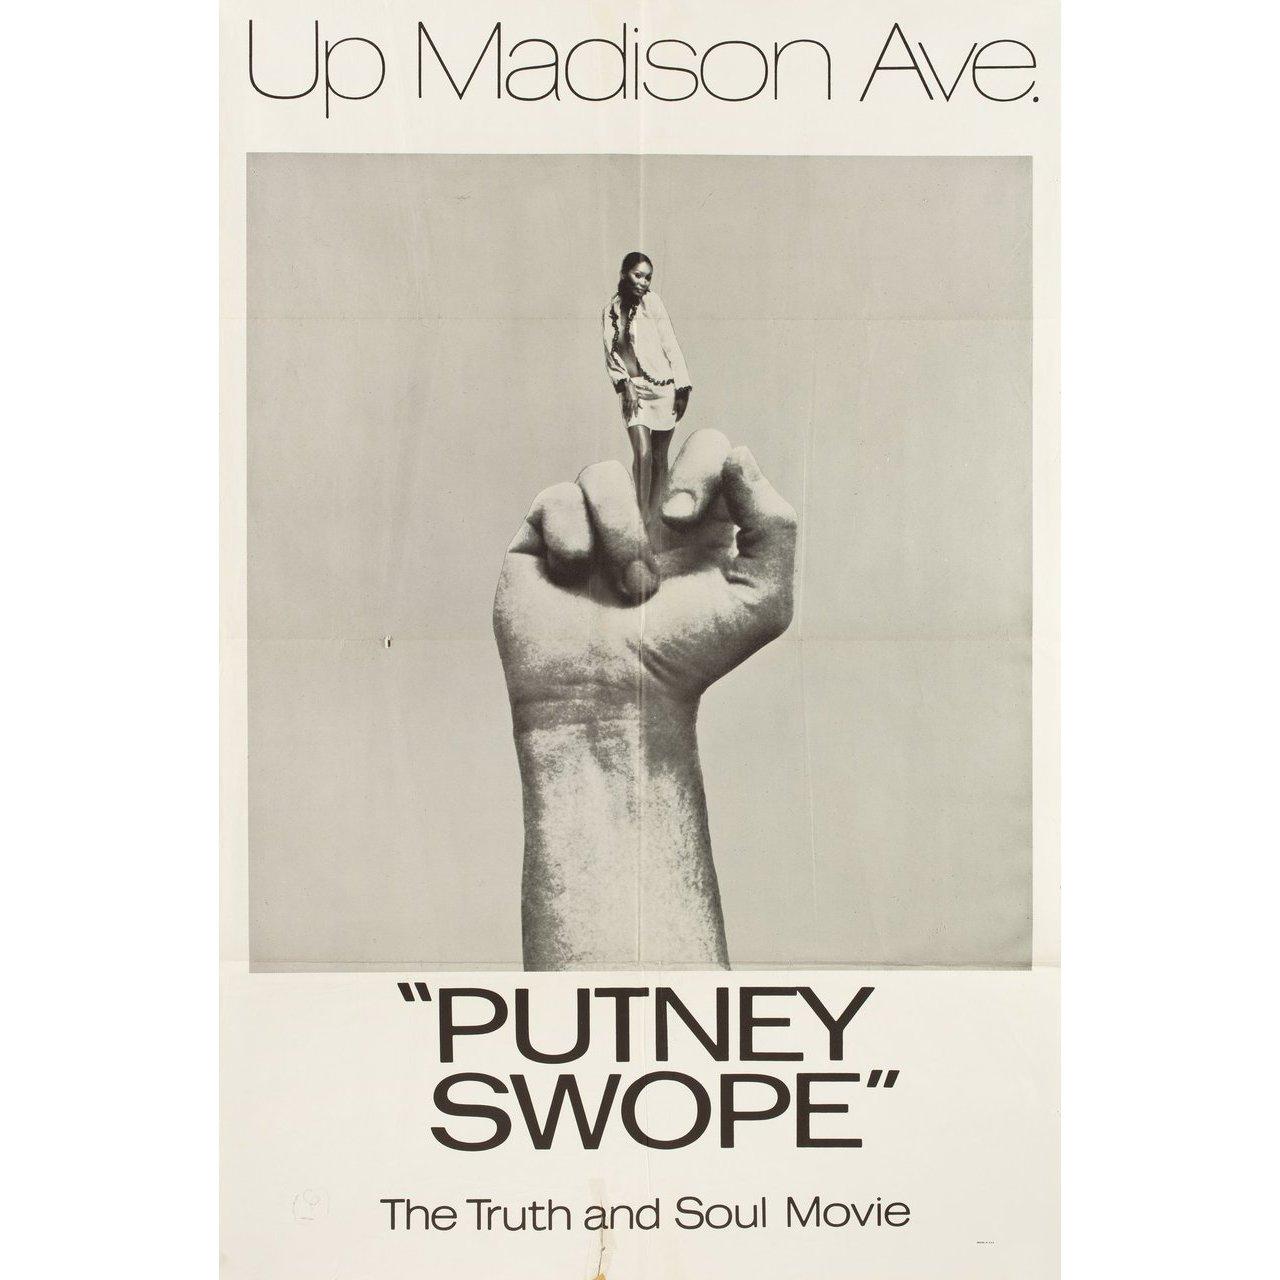 Original 1969 U.S. one sheet poster for the film Putney Swope directed by Robert Downey Sr. with Stan Gottlieb / Allen Garfield / Archie Russell / Ramon Gordon. Good-Very Good condition, folded with bleed through & tear at bottom. Many original